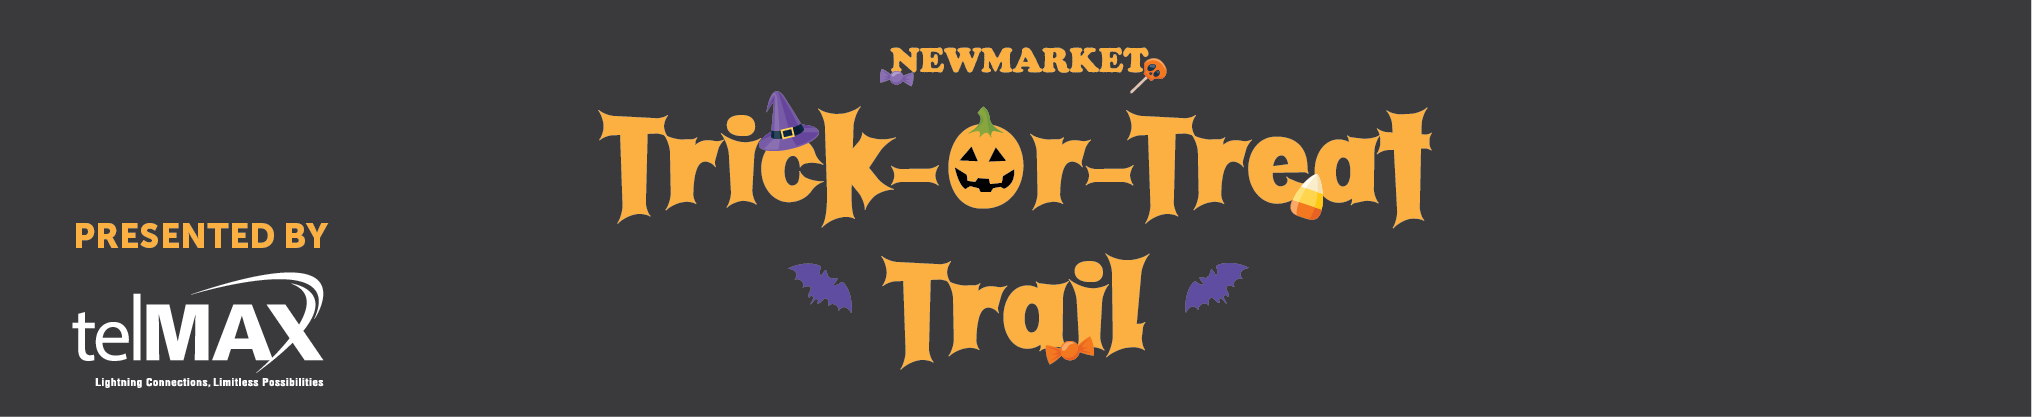 TrickortreatTrail-Banner.png